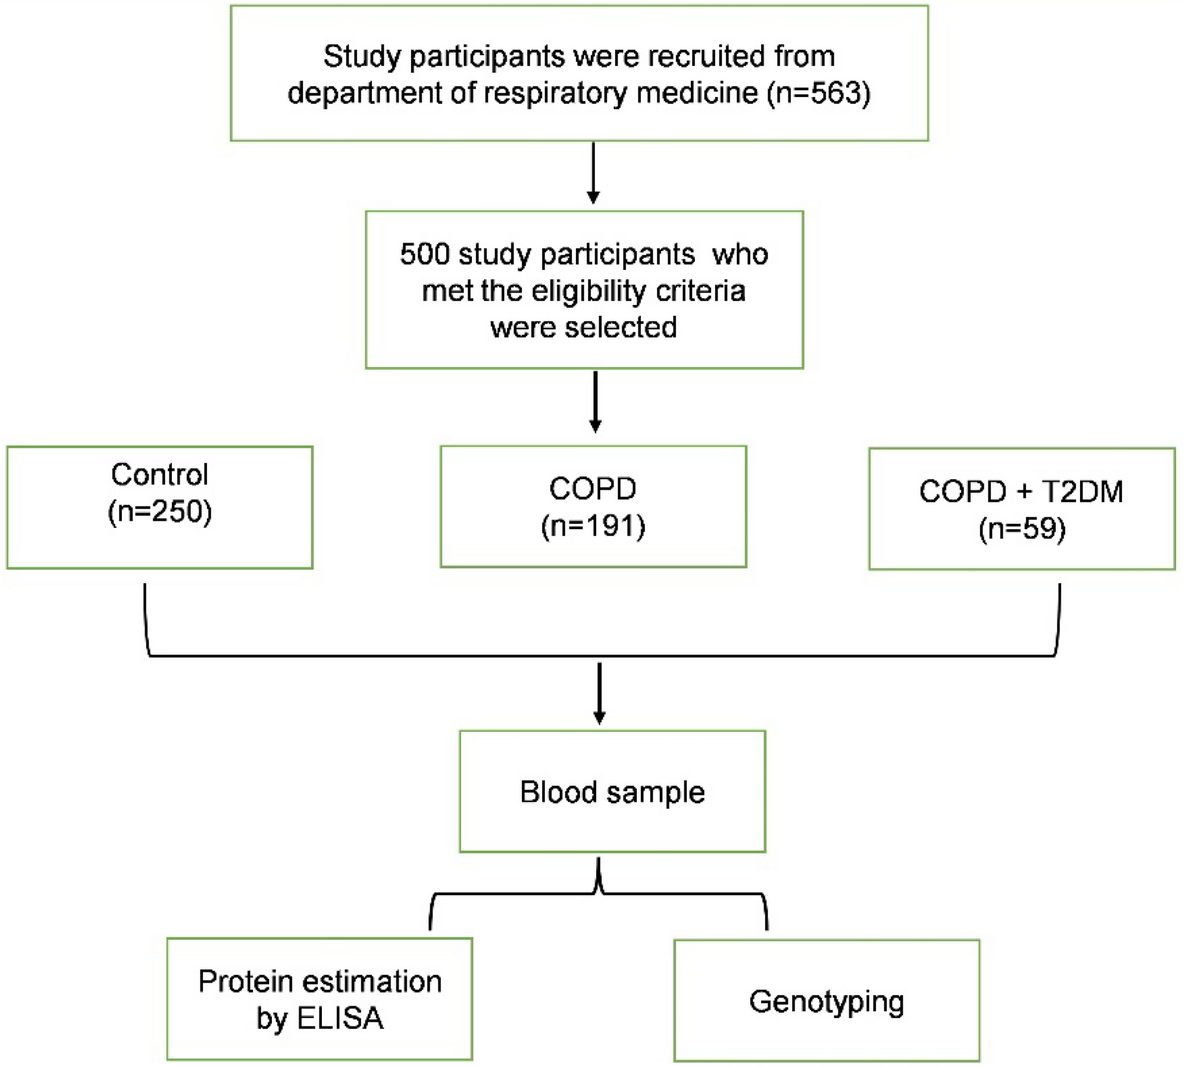 Serum Biomarkers and Gene Polymorphisms in COPD and COPD with T2DM Patients